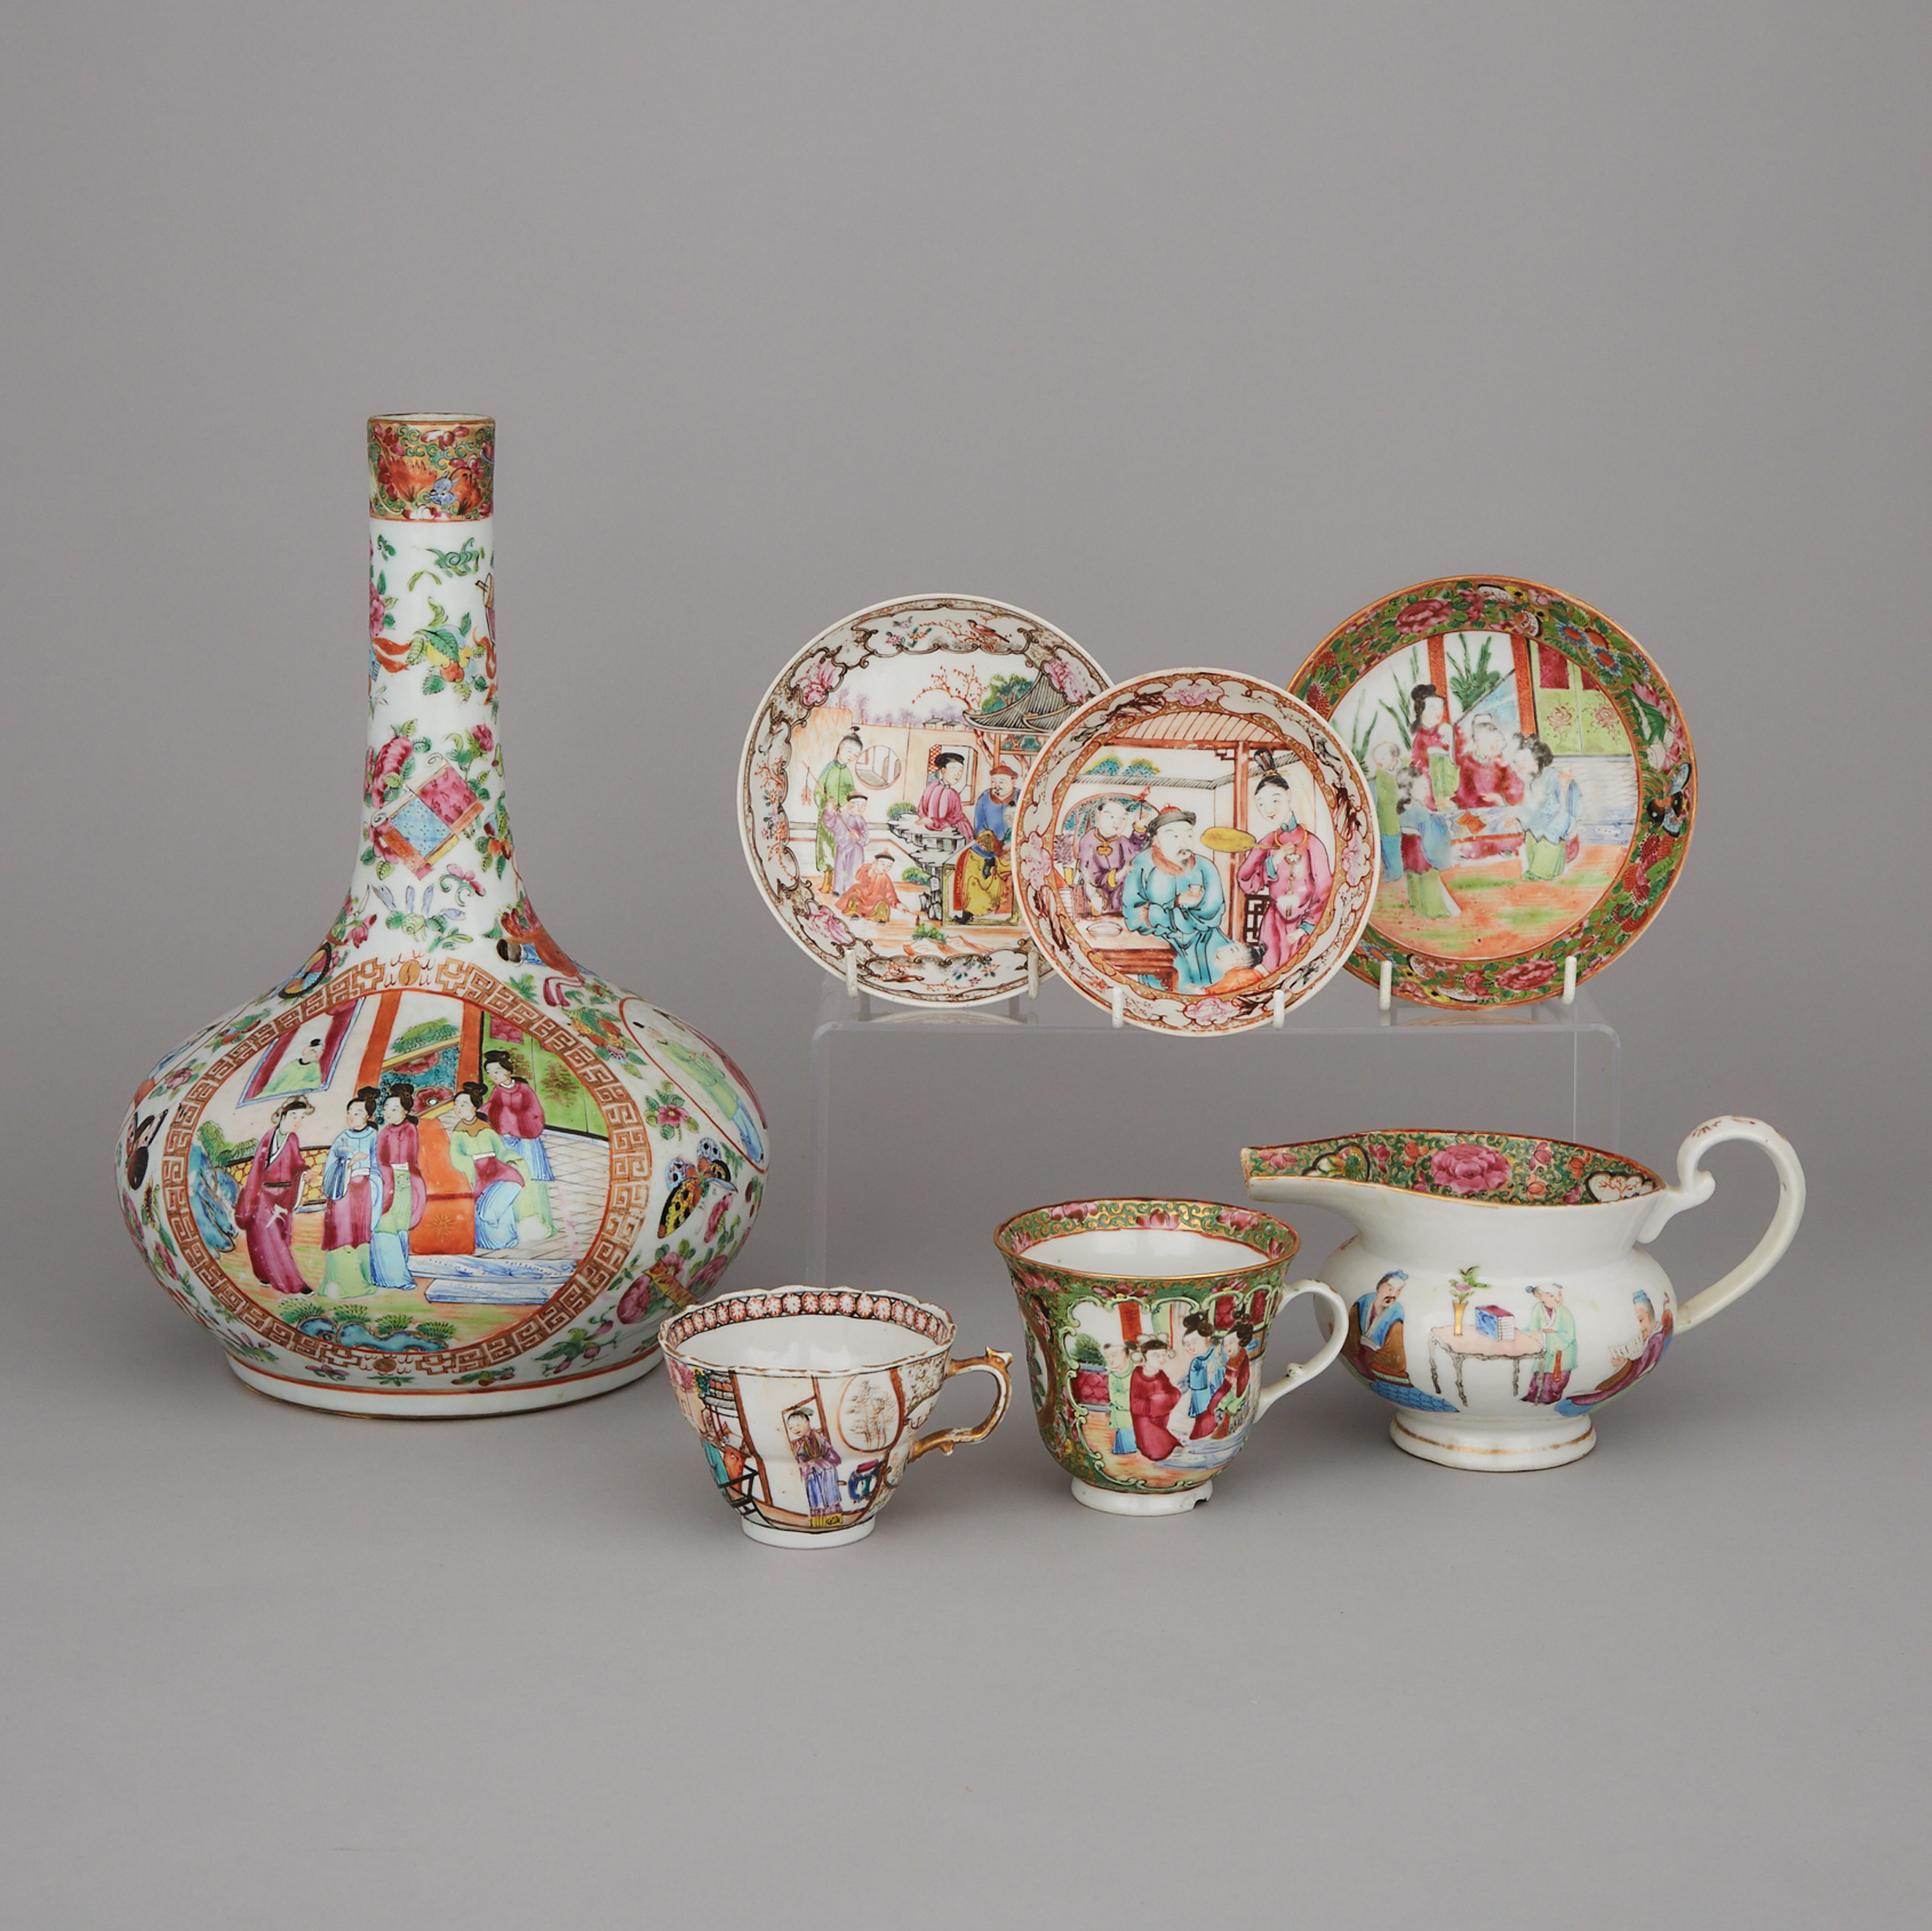 A Group of Seven Canton Famille Rose Wares, 18th/19th Century